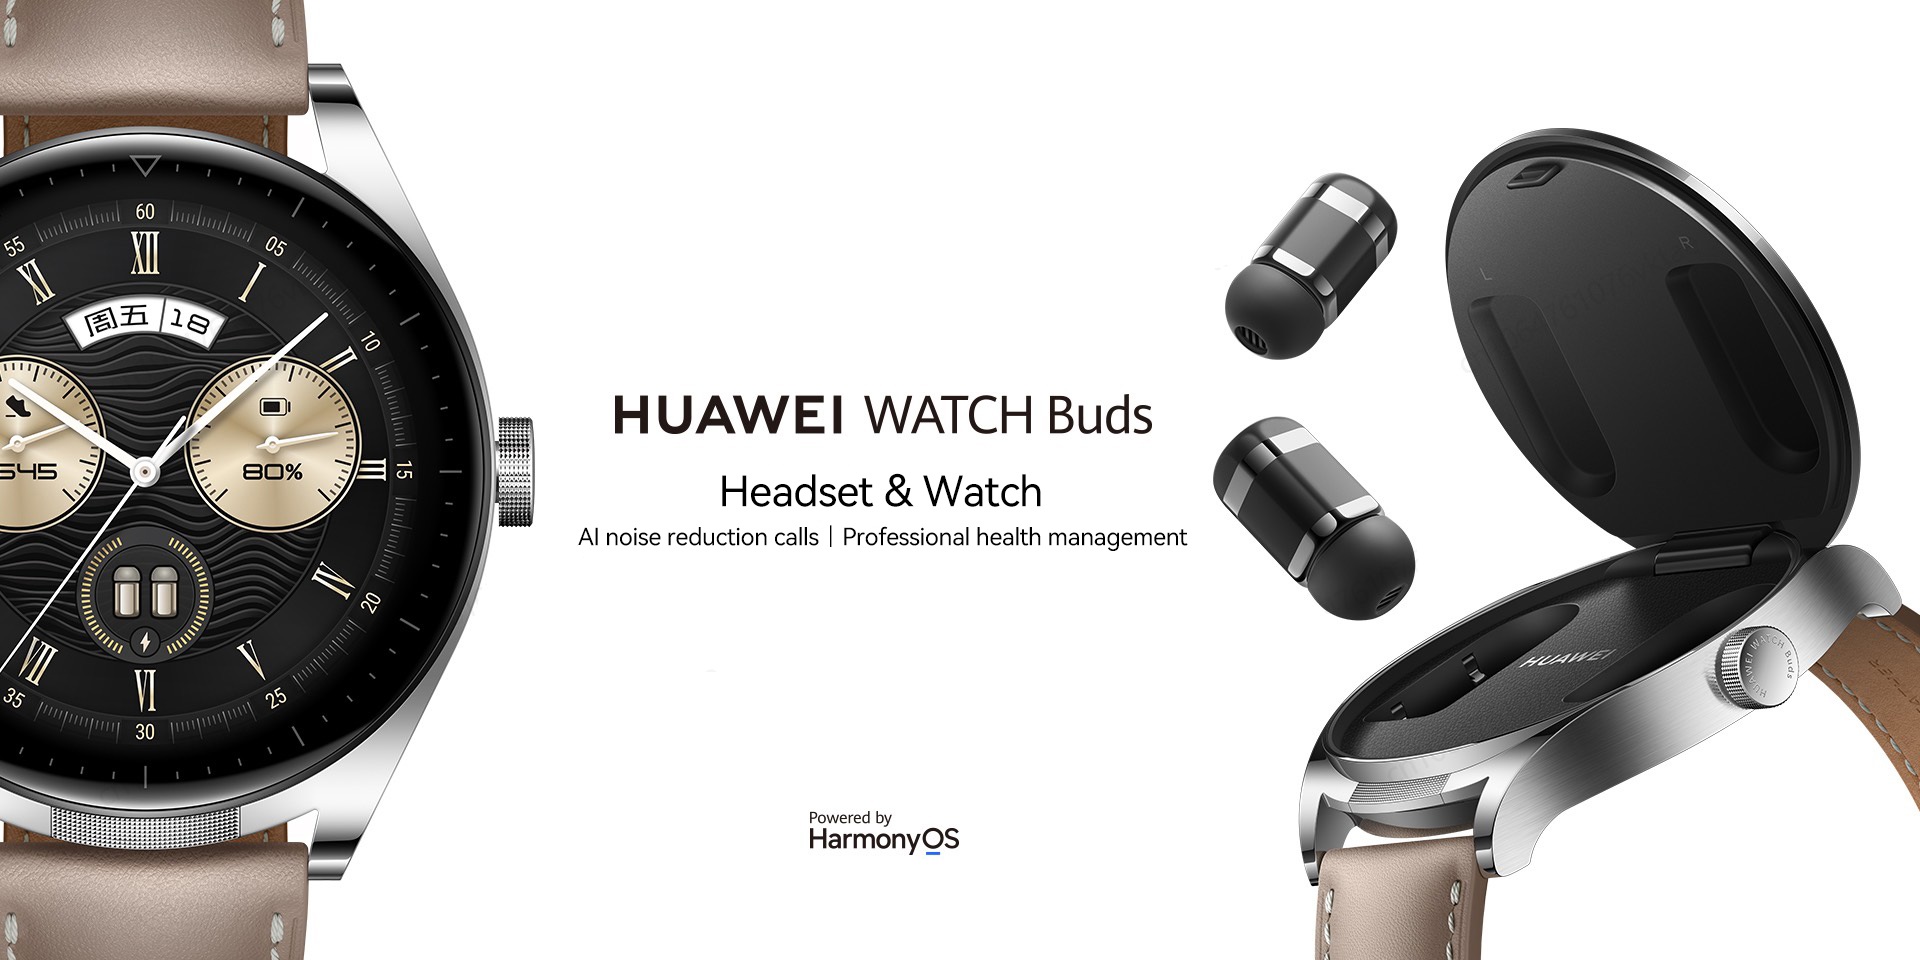 Huawei smartwatch with built-in earbuds goes global